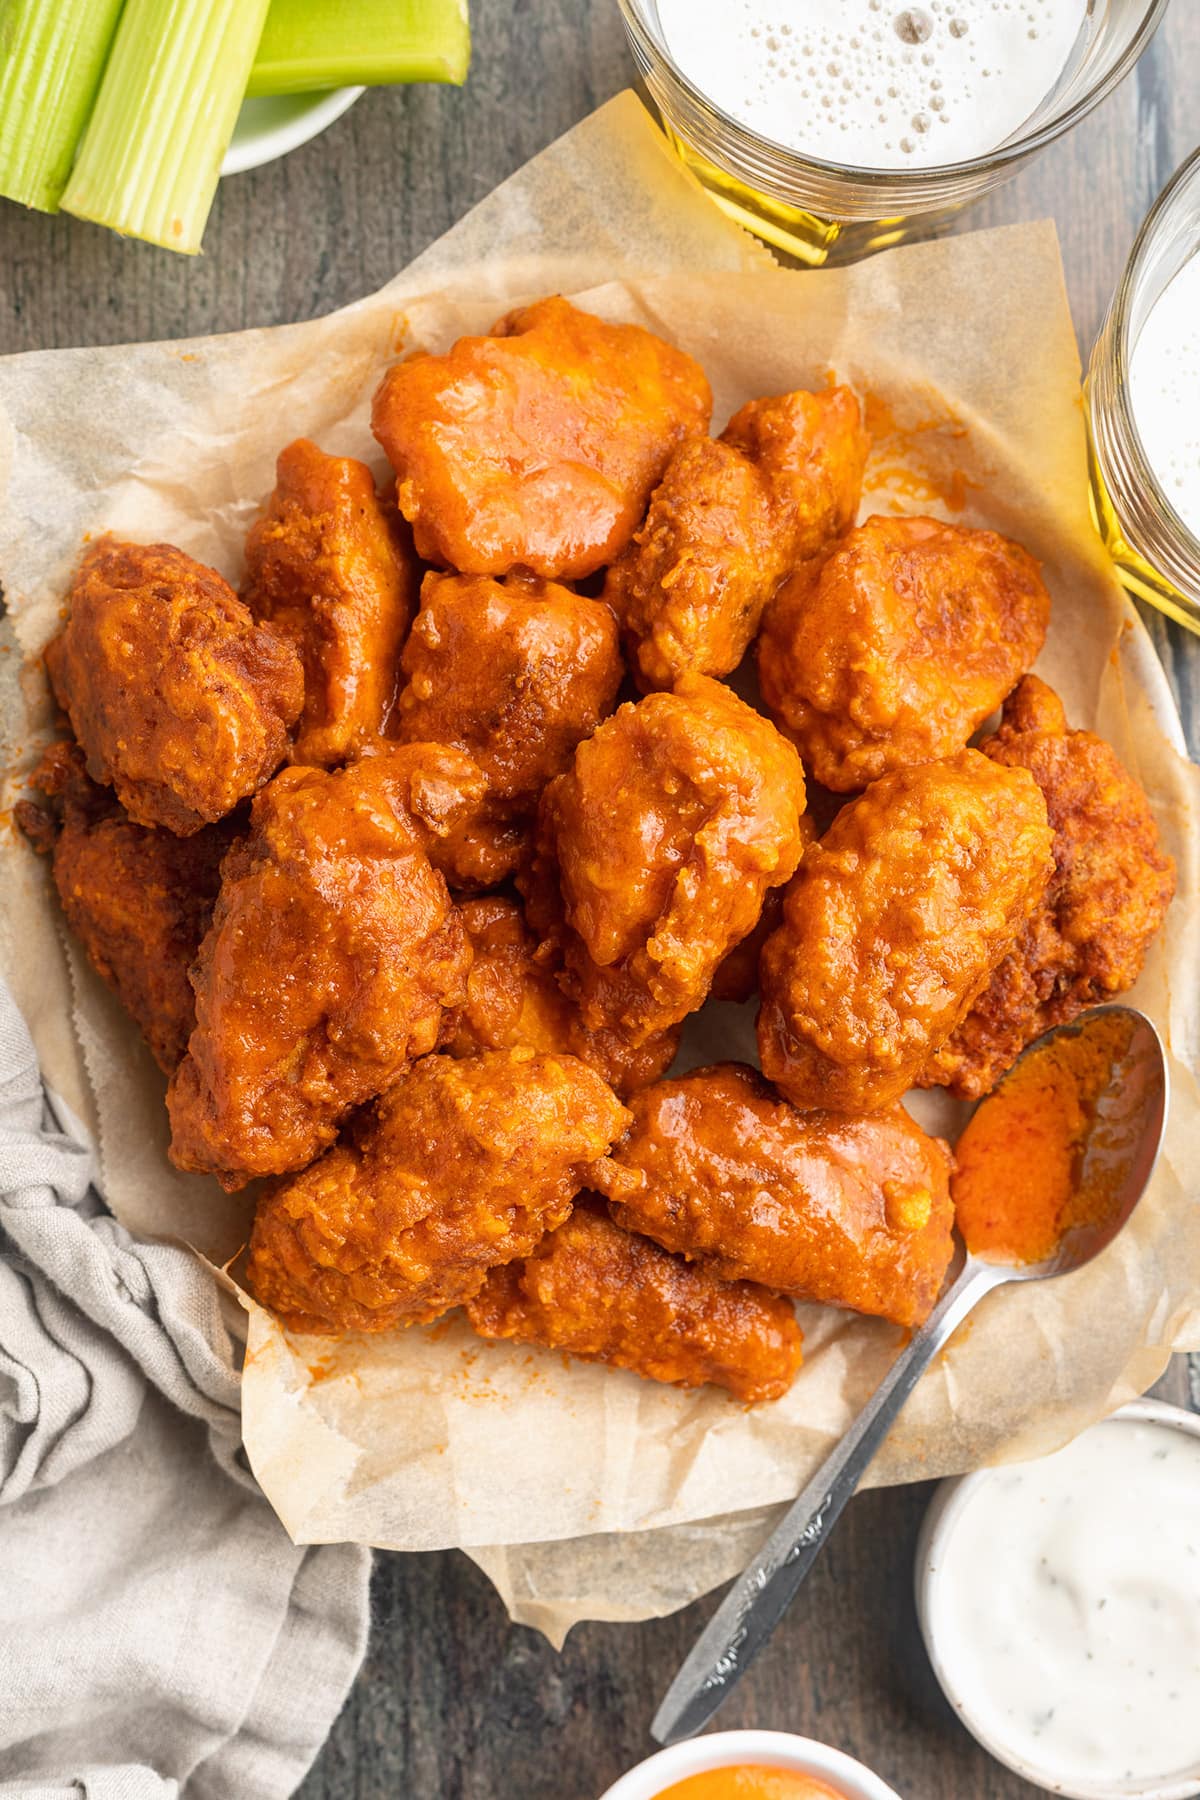 Top-down view of a large bowl, lined with parchment paper, holding several orange-sauced buffalo chicken wings.